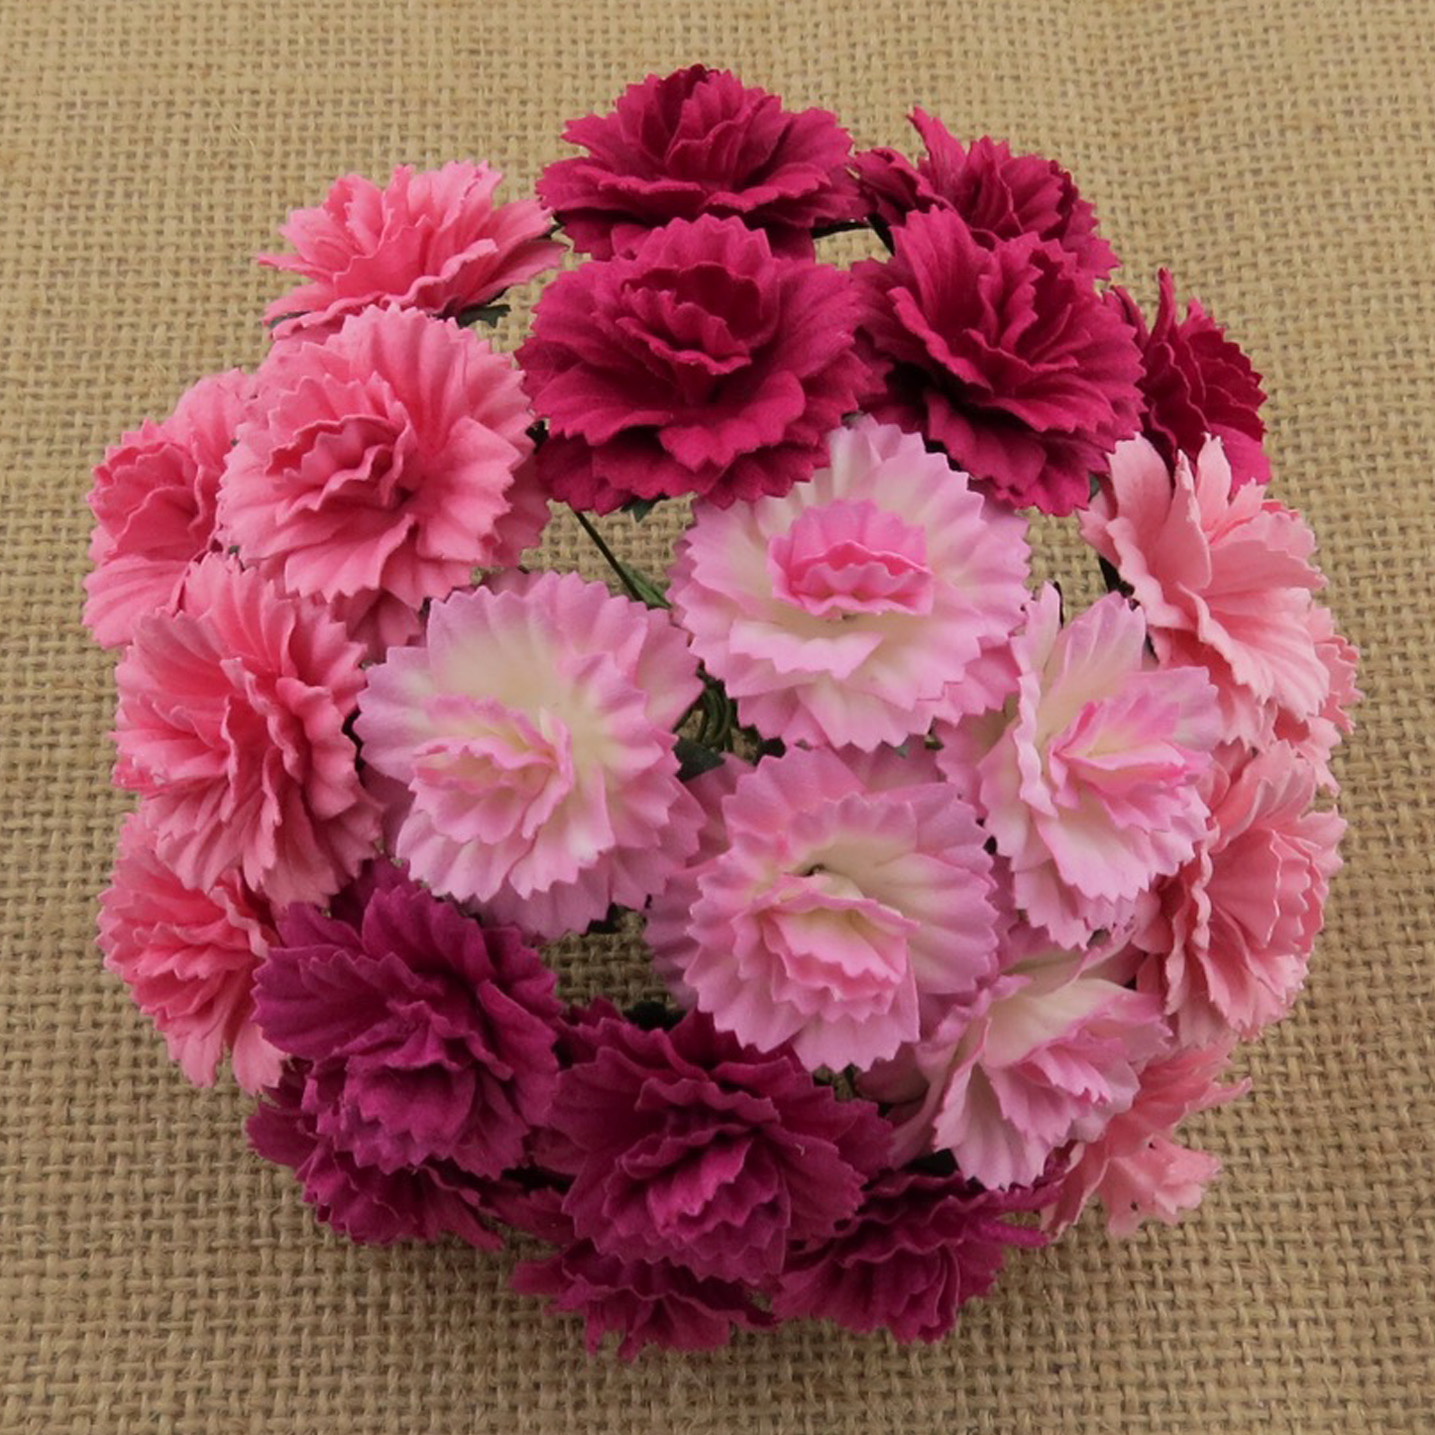 50 MIXED PINK MULBERRY PAPER CARNATION FLOWERS